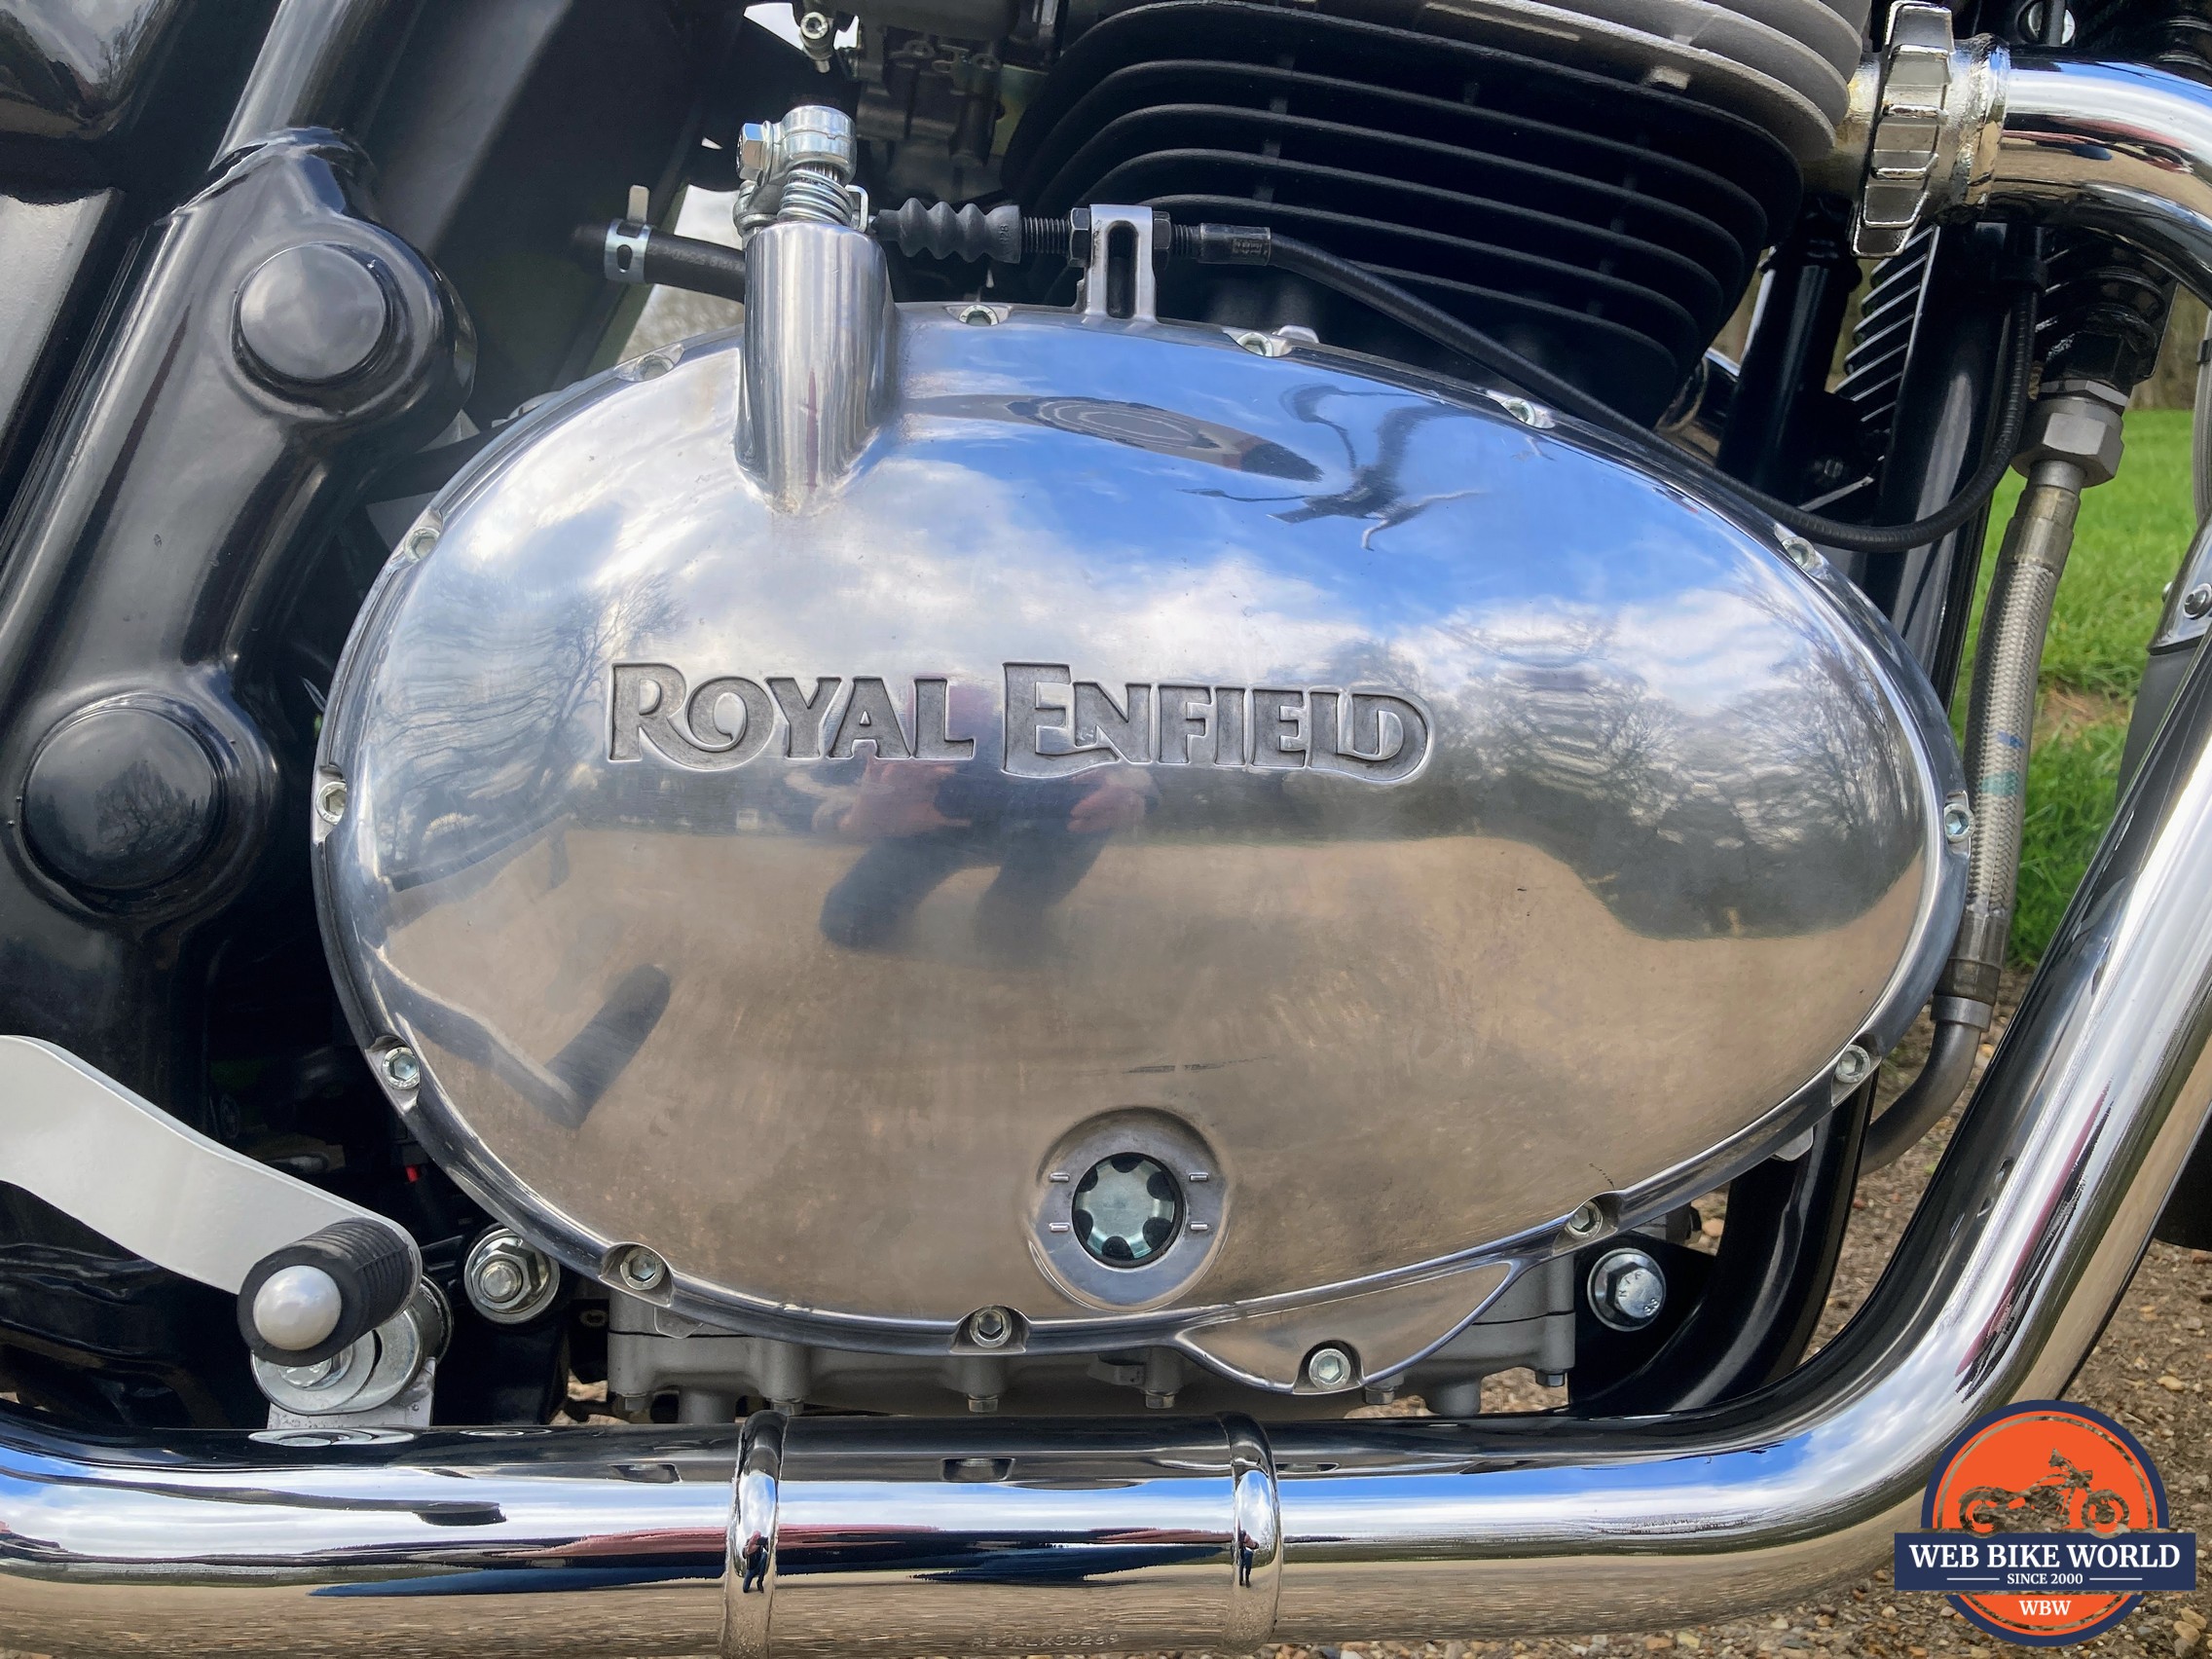 metal casing with the royal enfield name embossed